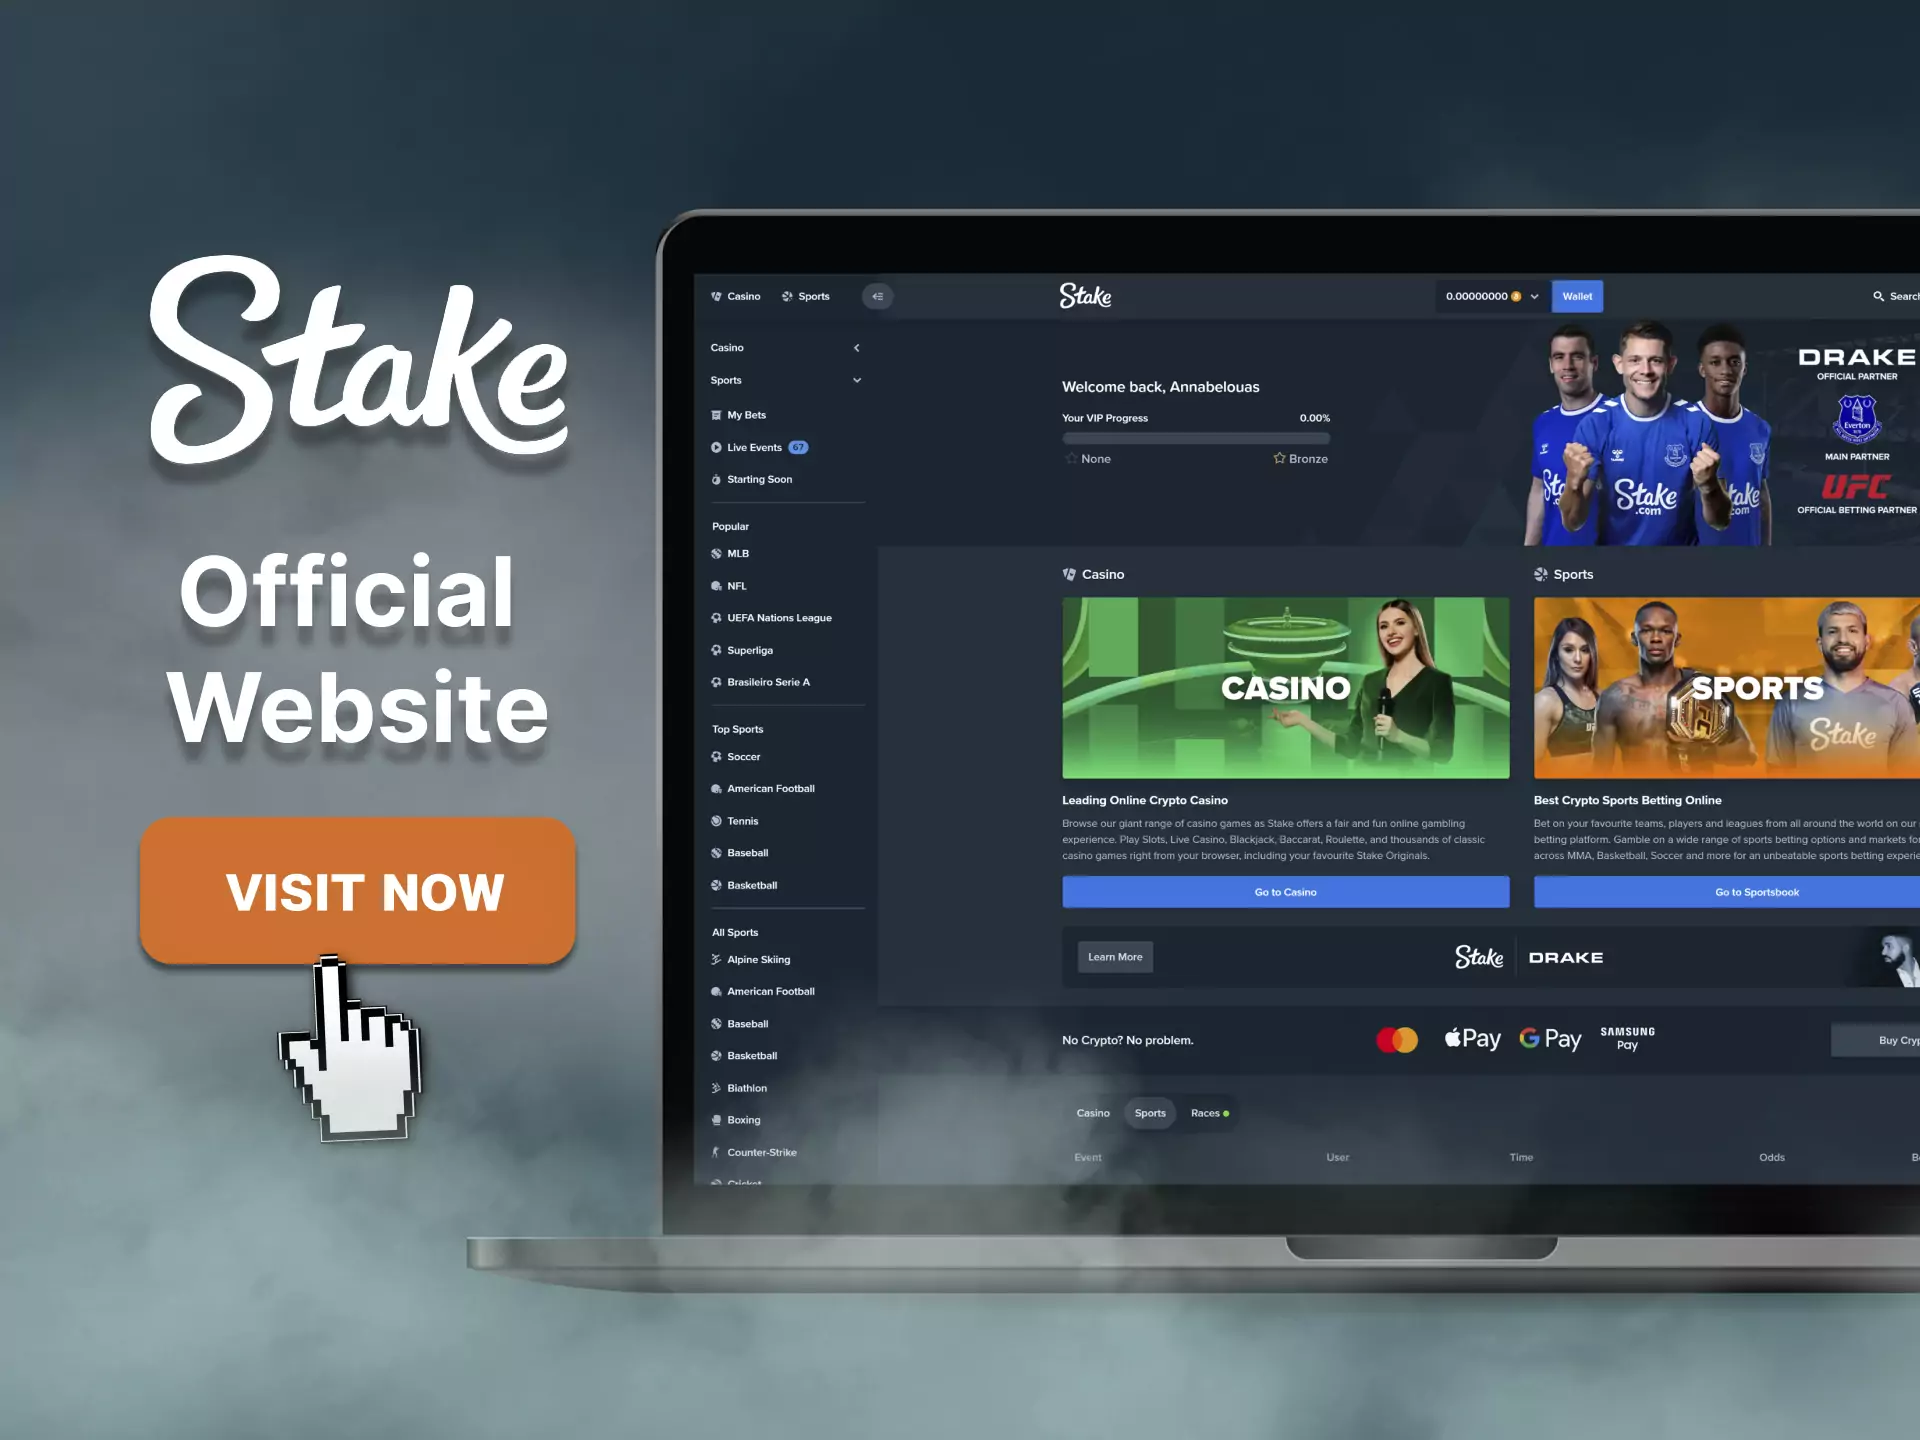 Place bets only on the official website of Stake and avoid fraud.